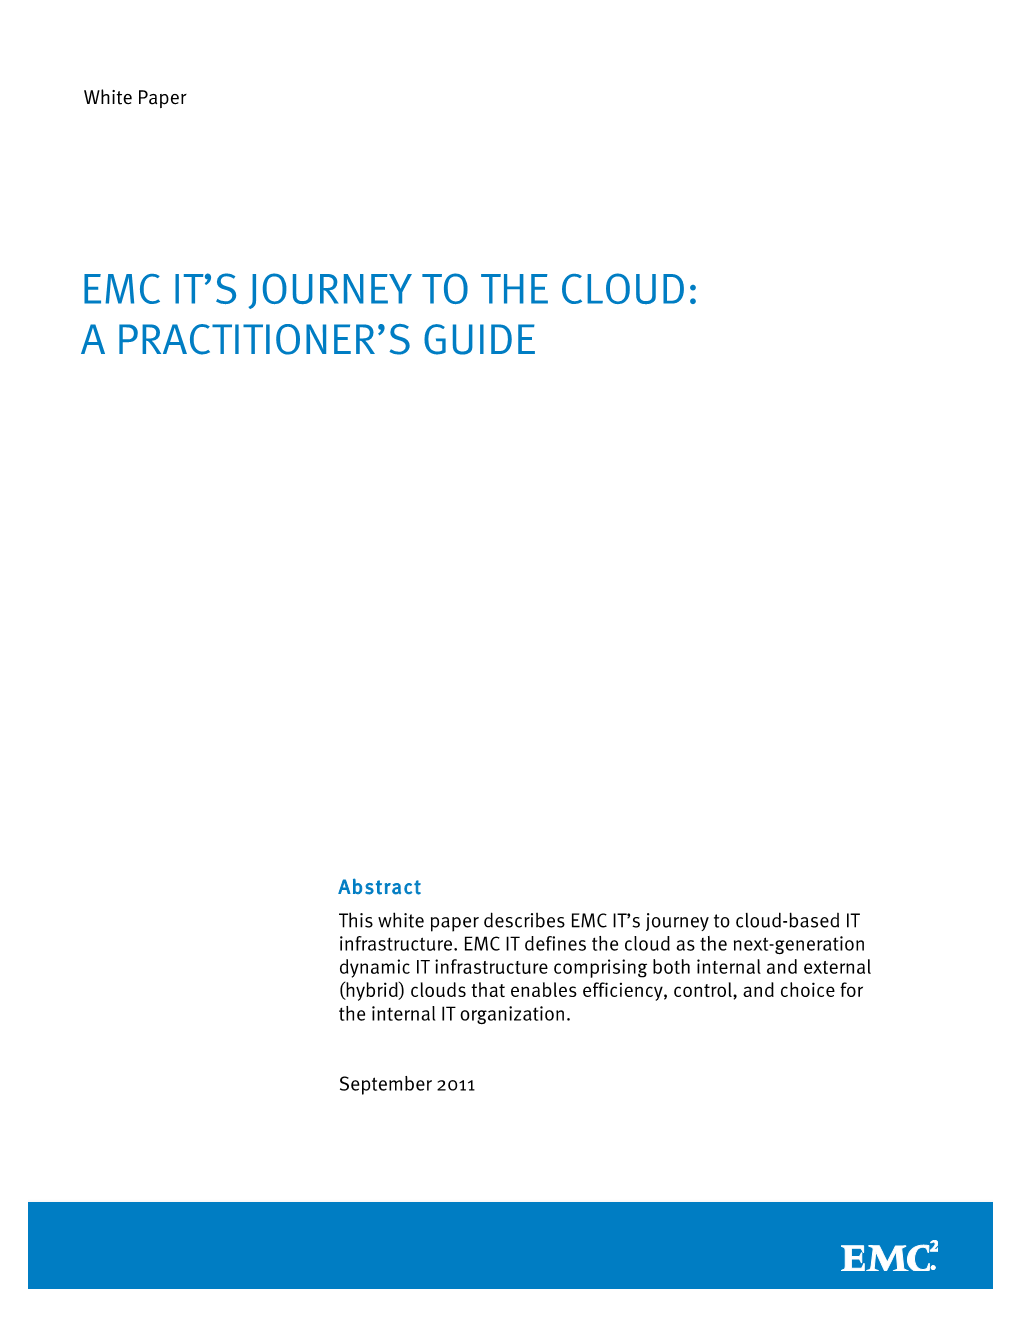 Emc It's Journey to the Cloud: a Practitioner's Guide